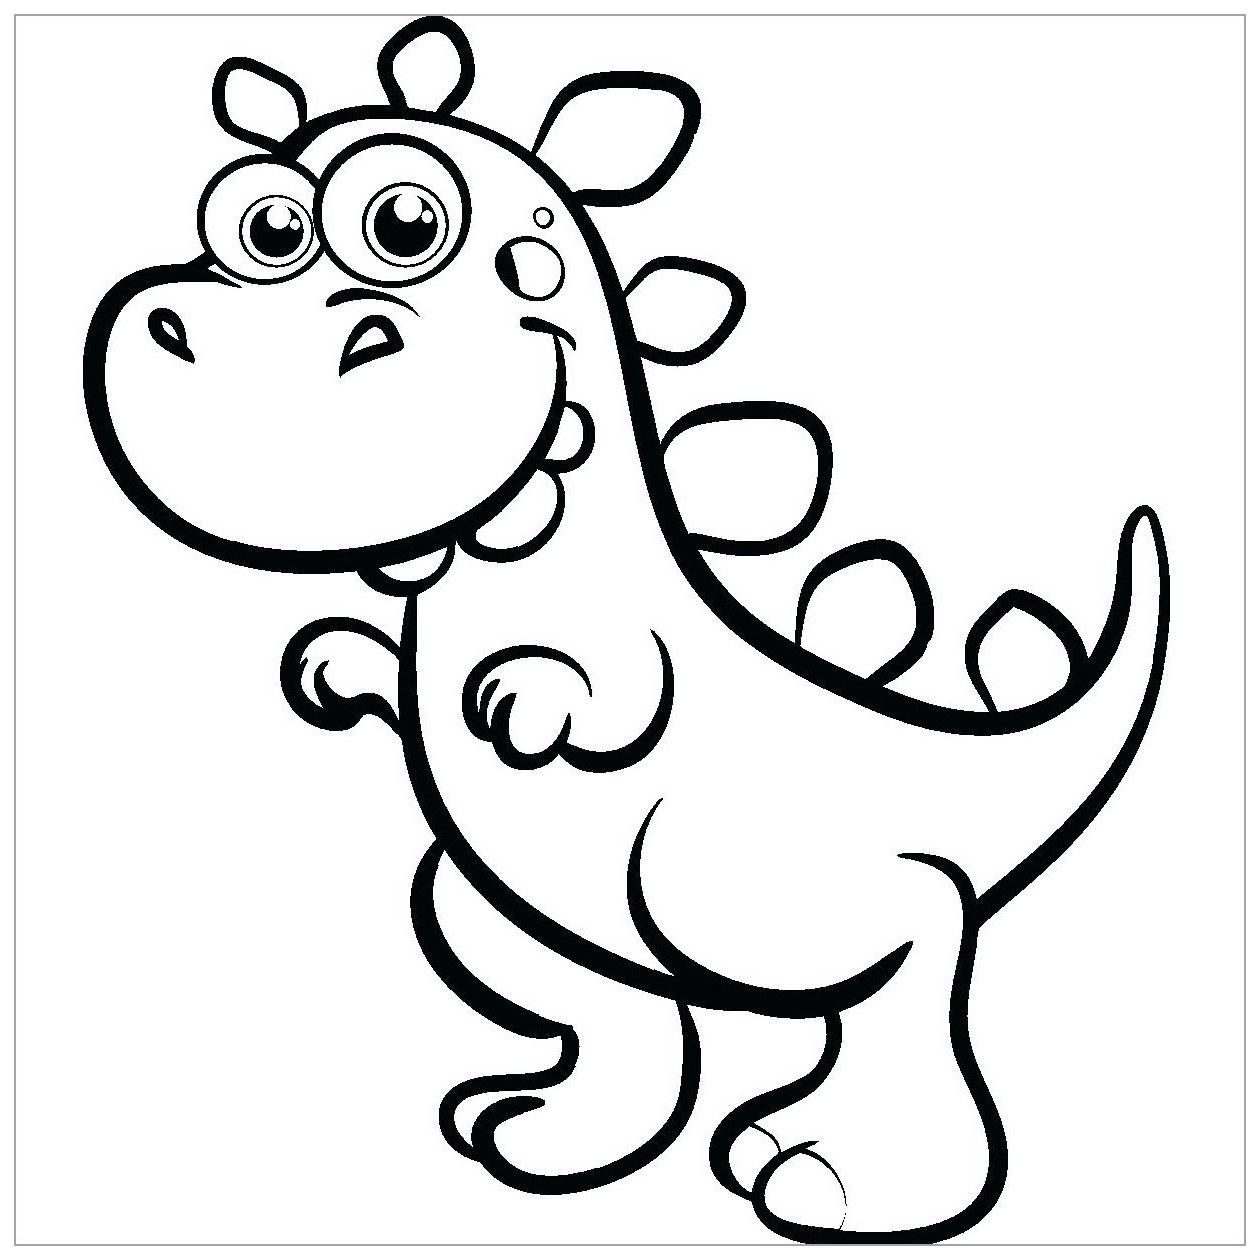 Download Dinosaurs To Download T Rex Cartoon Dinosaurs Kids Coloring Pages